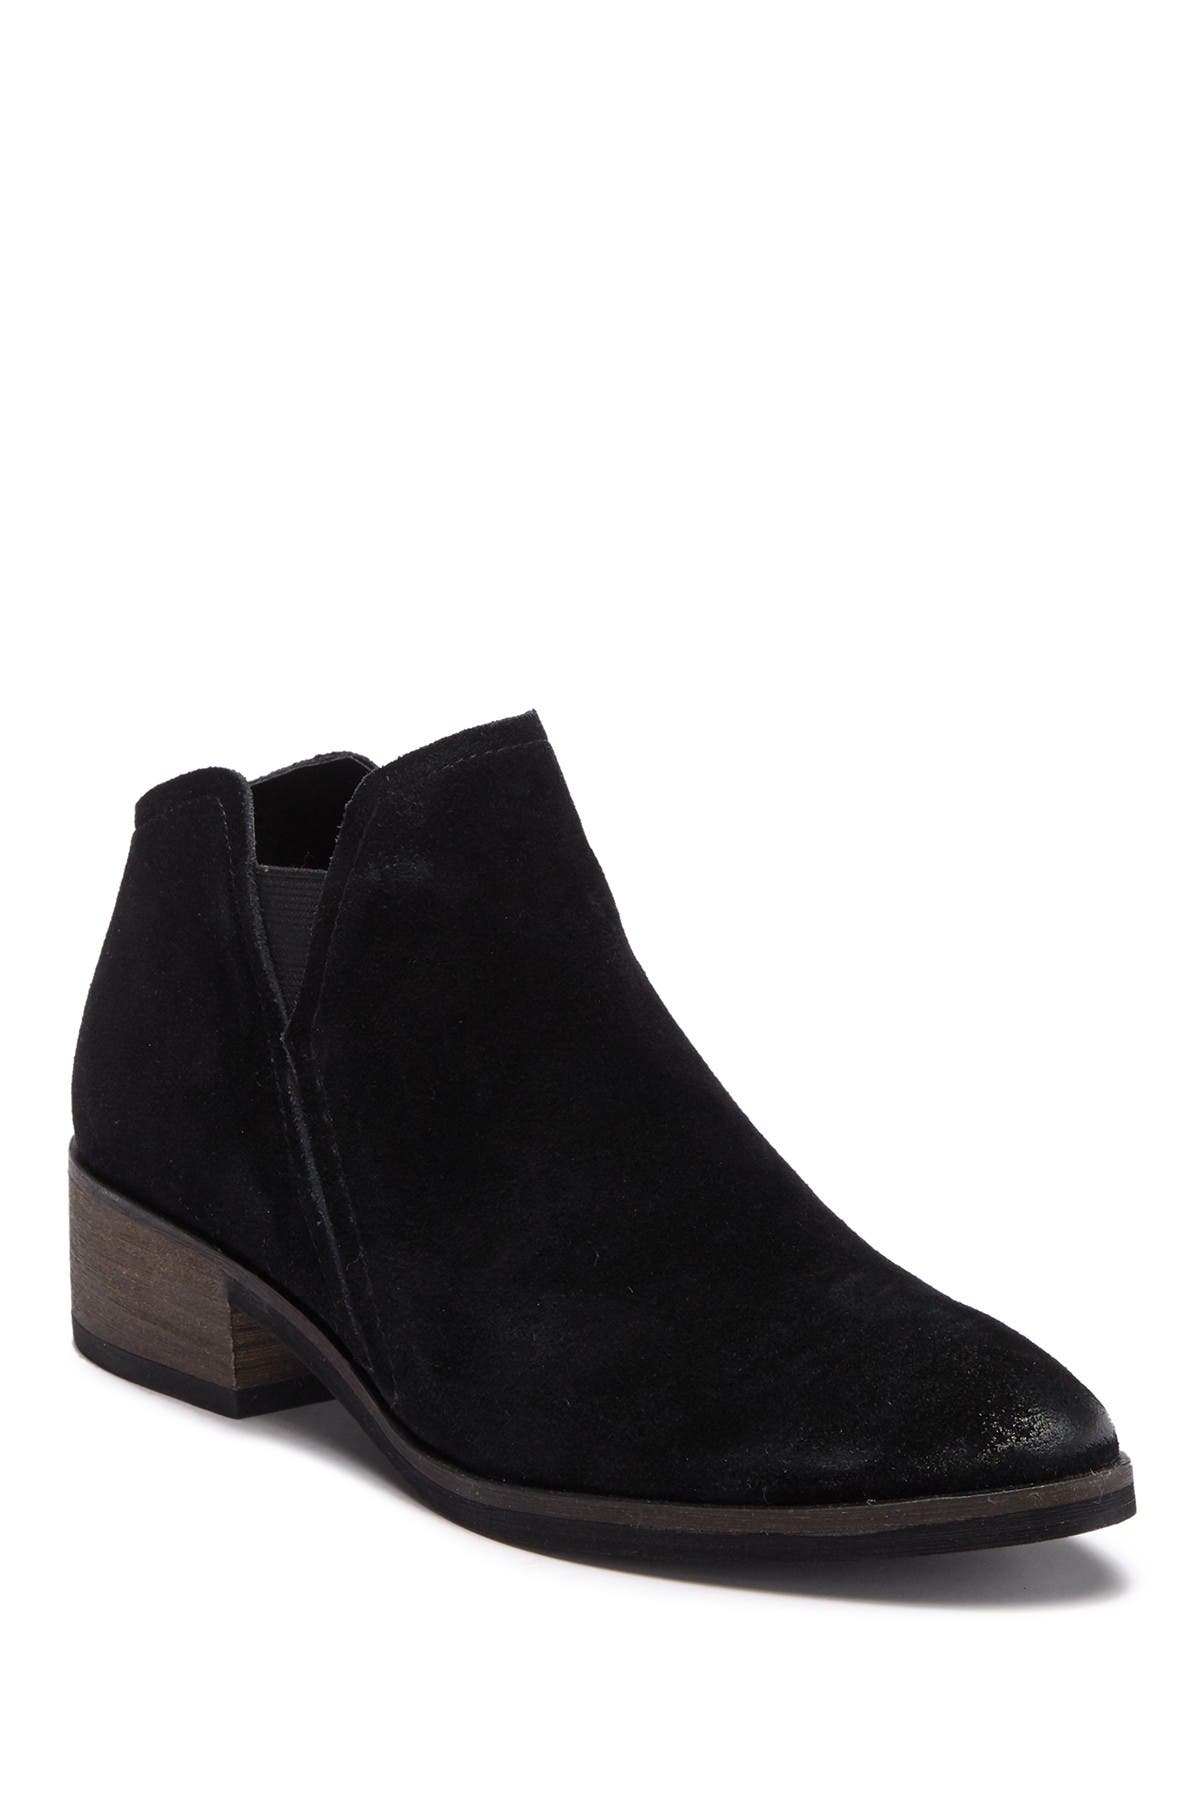 dolce vita tay ankle boots